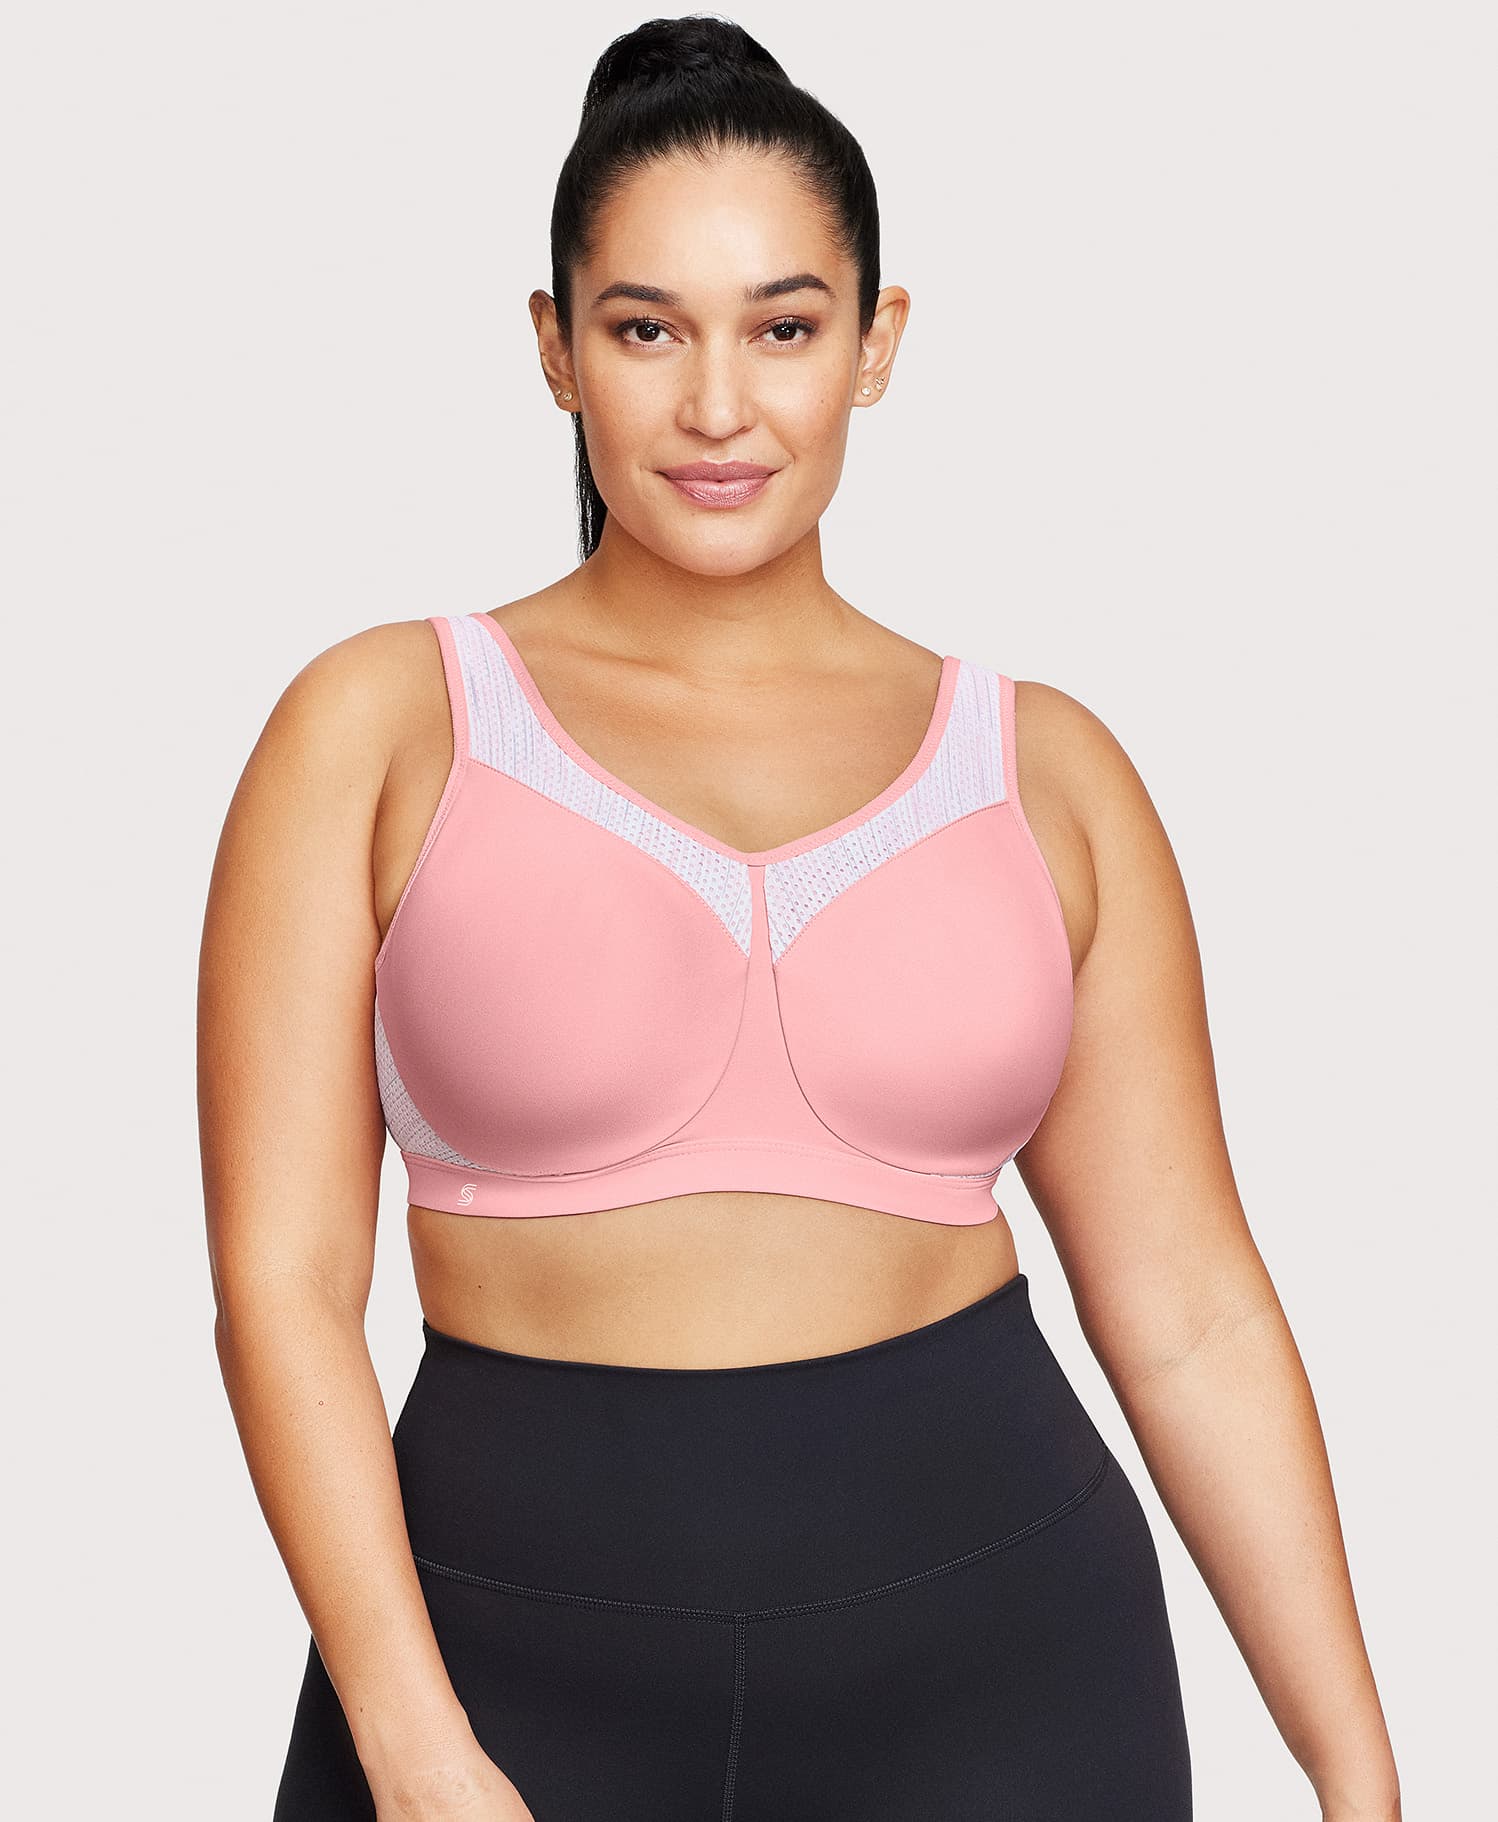 Patterned Sports Bra with 40% discount!